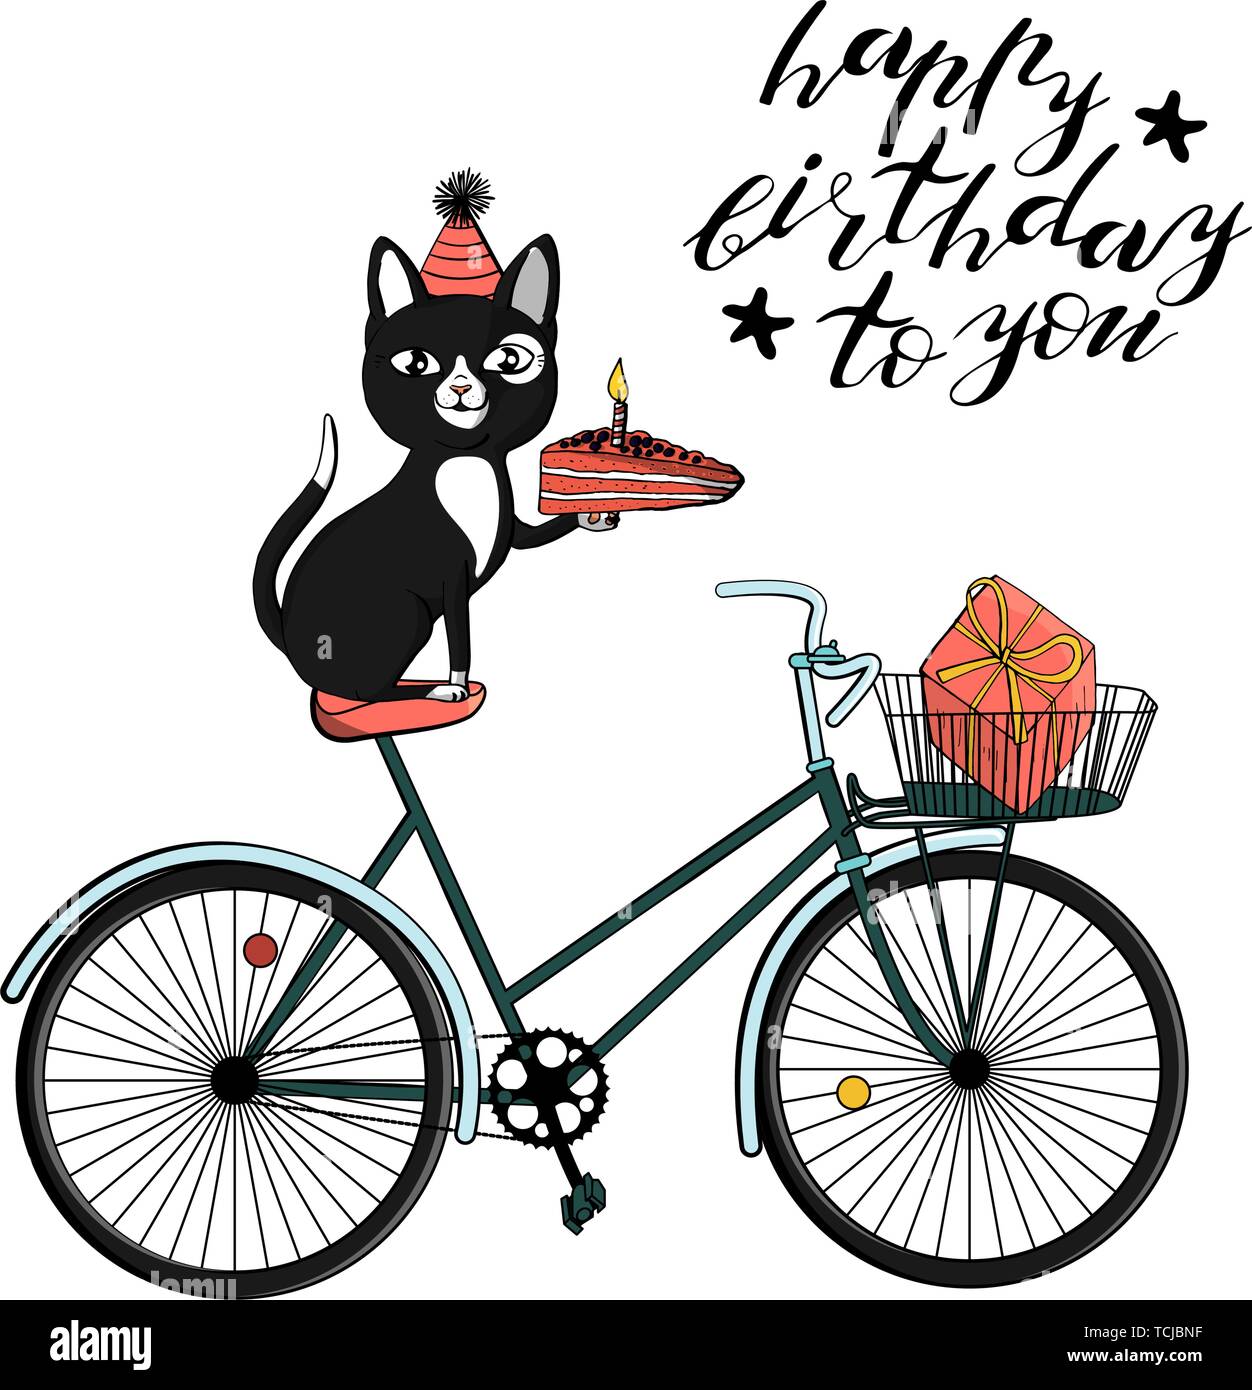 Black Cat In Cone Hat Sitting On Bicycle And Holding Piece Of Cake